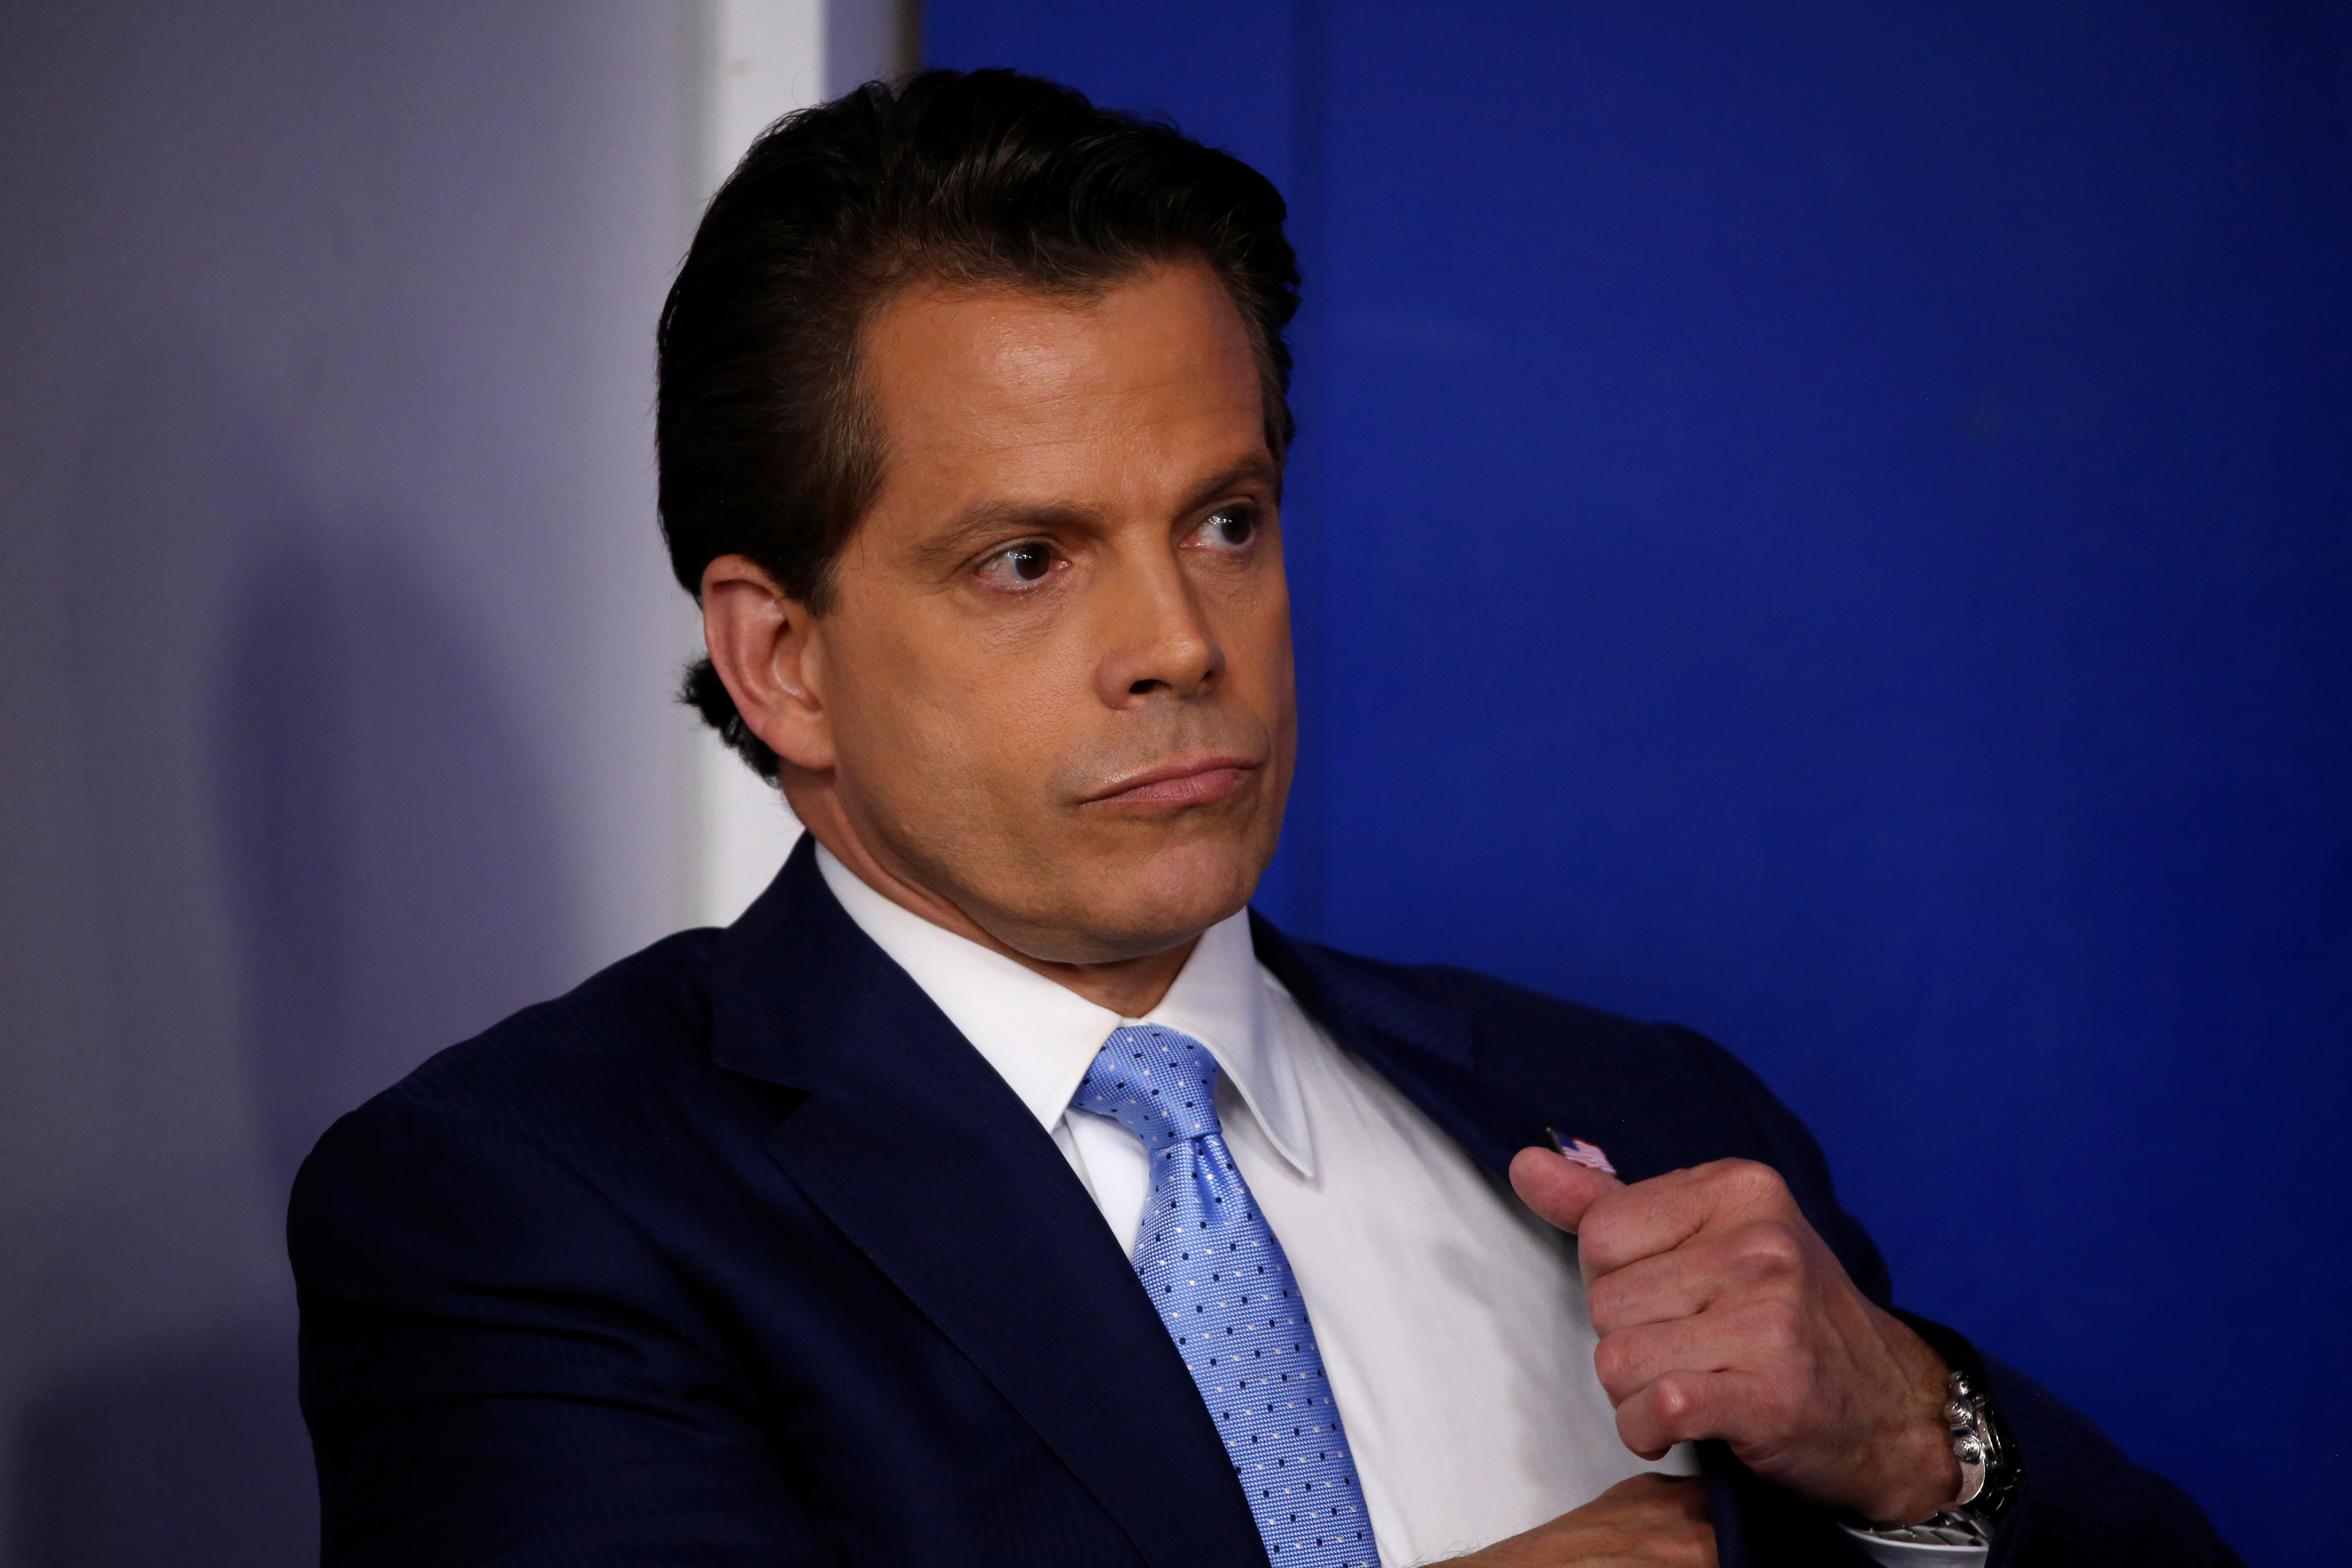 New White House Communications Director Scaramucci stands by during the daily briefing at the White House in Washington